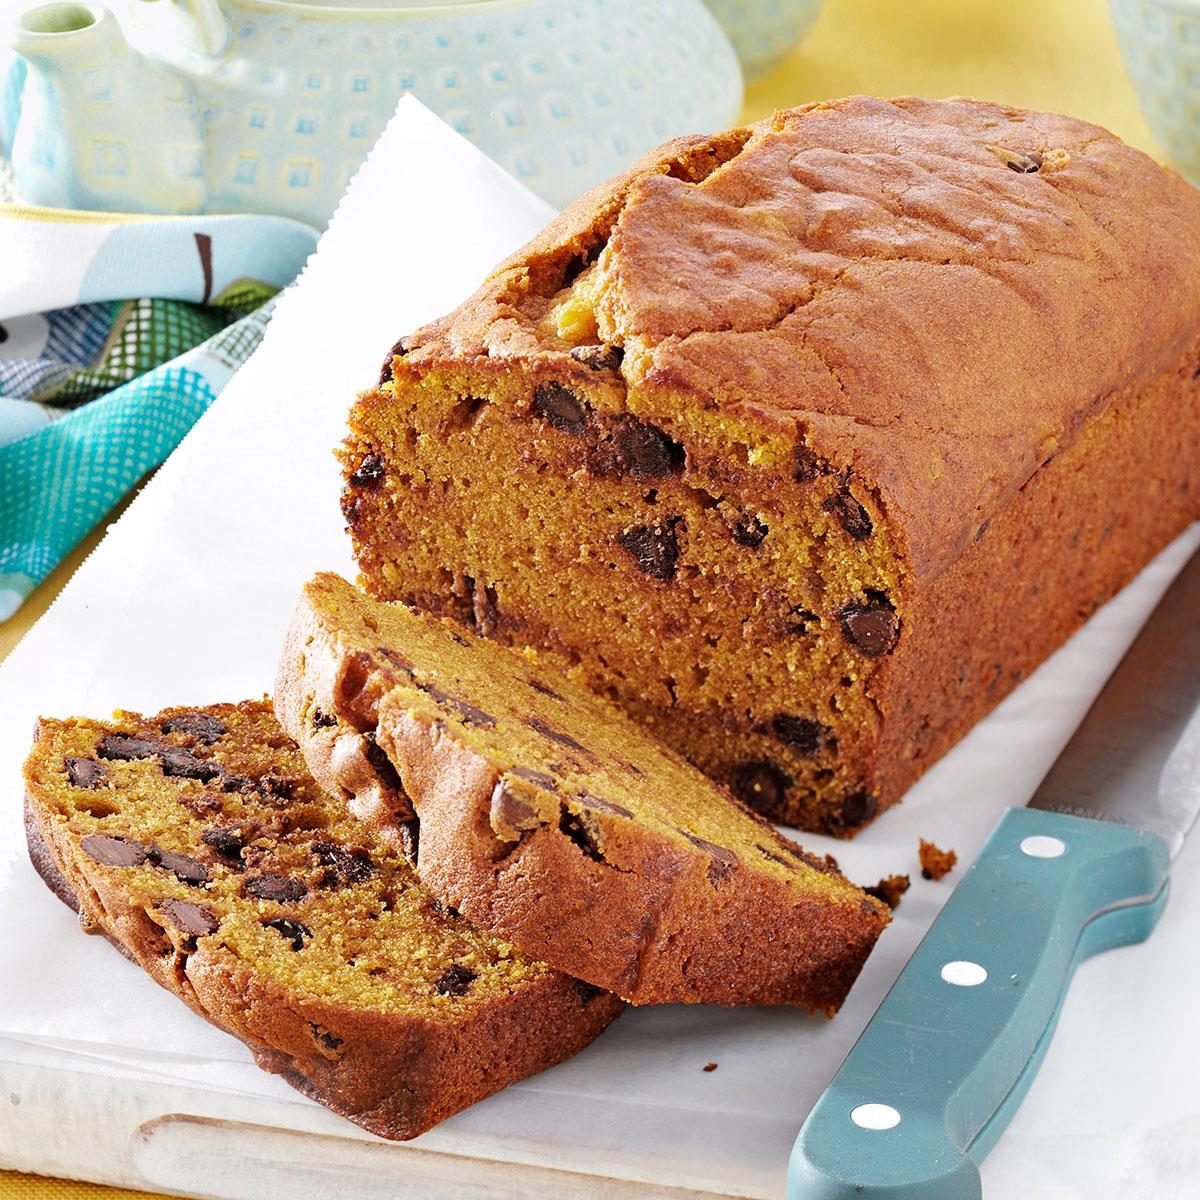 Recipes For Pumpkin Bread With Chocolate Chips